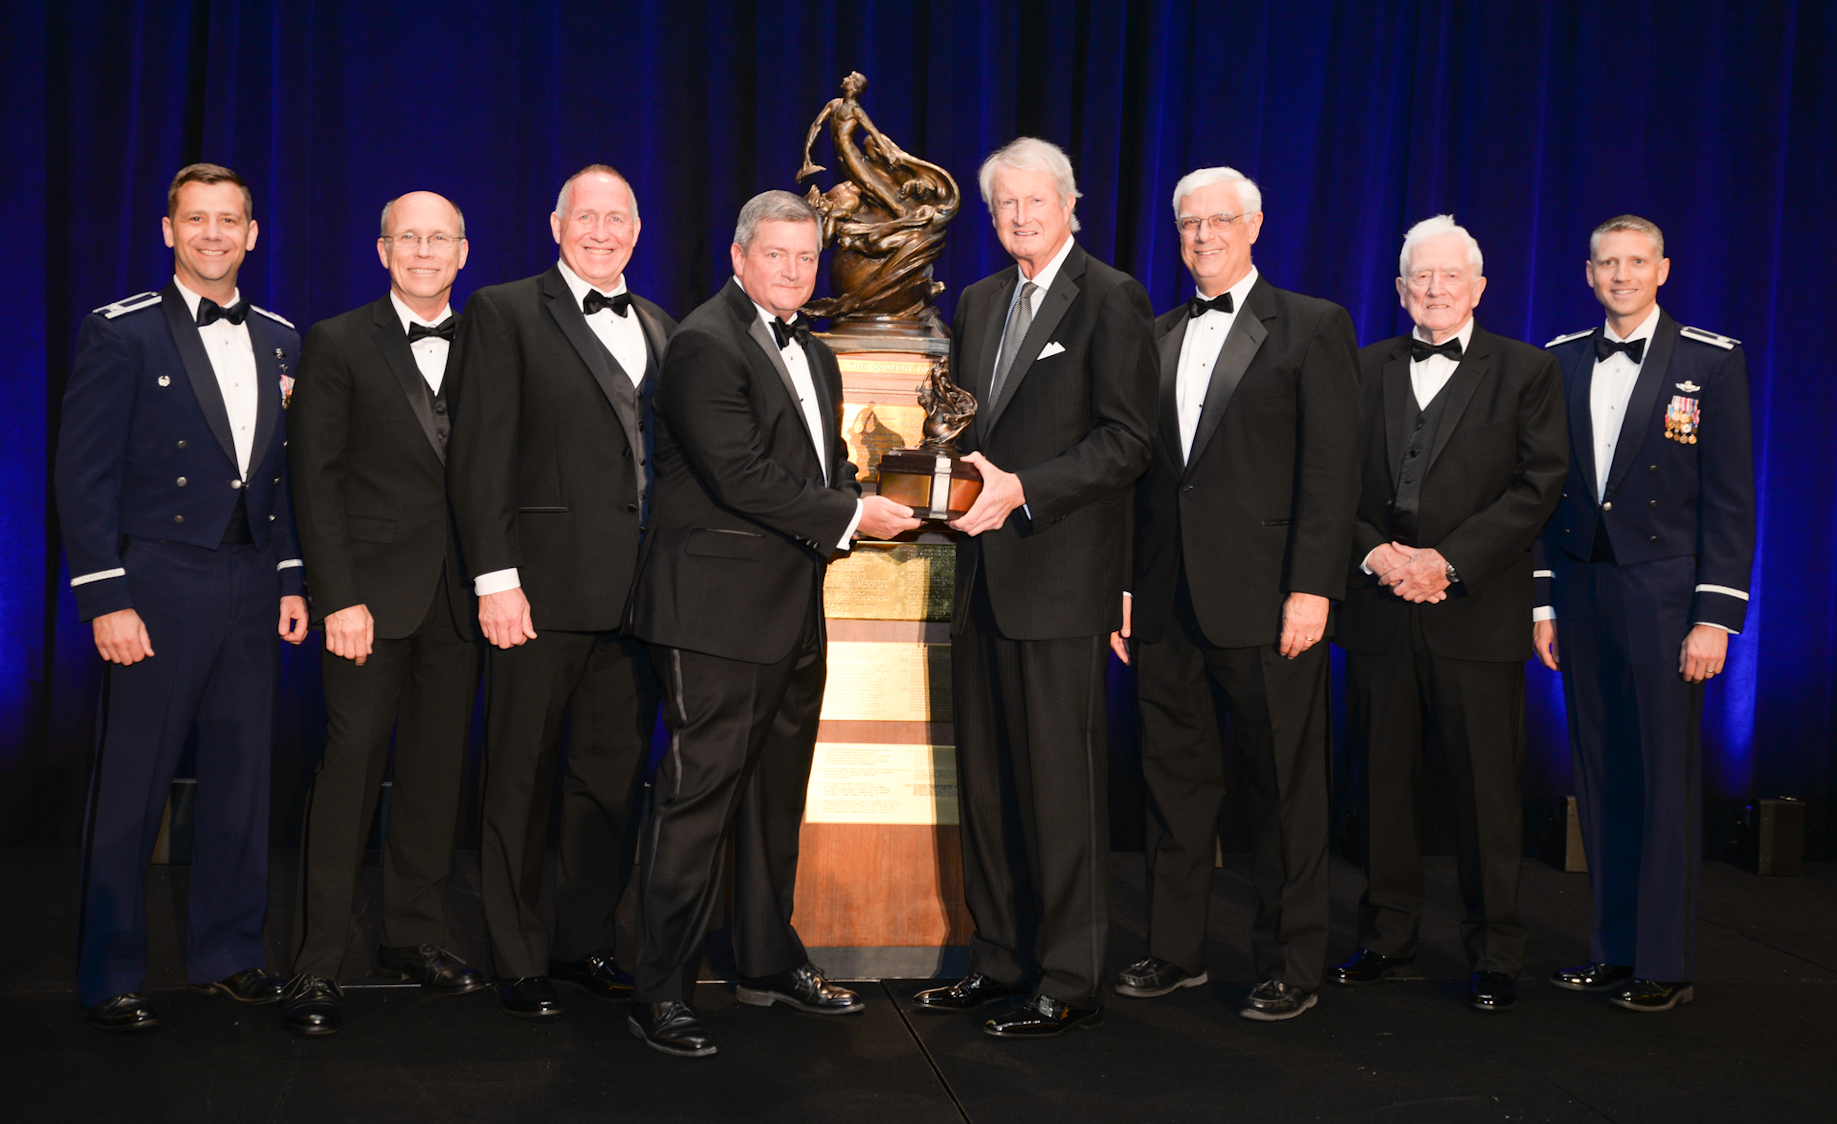 NAA Awards the 2018 Collier Trophy to the Auto GCAS Team Aviation Pros